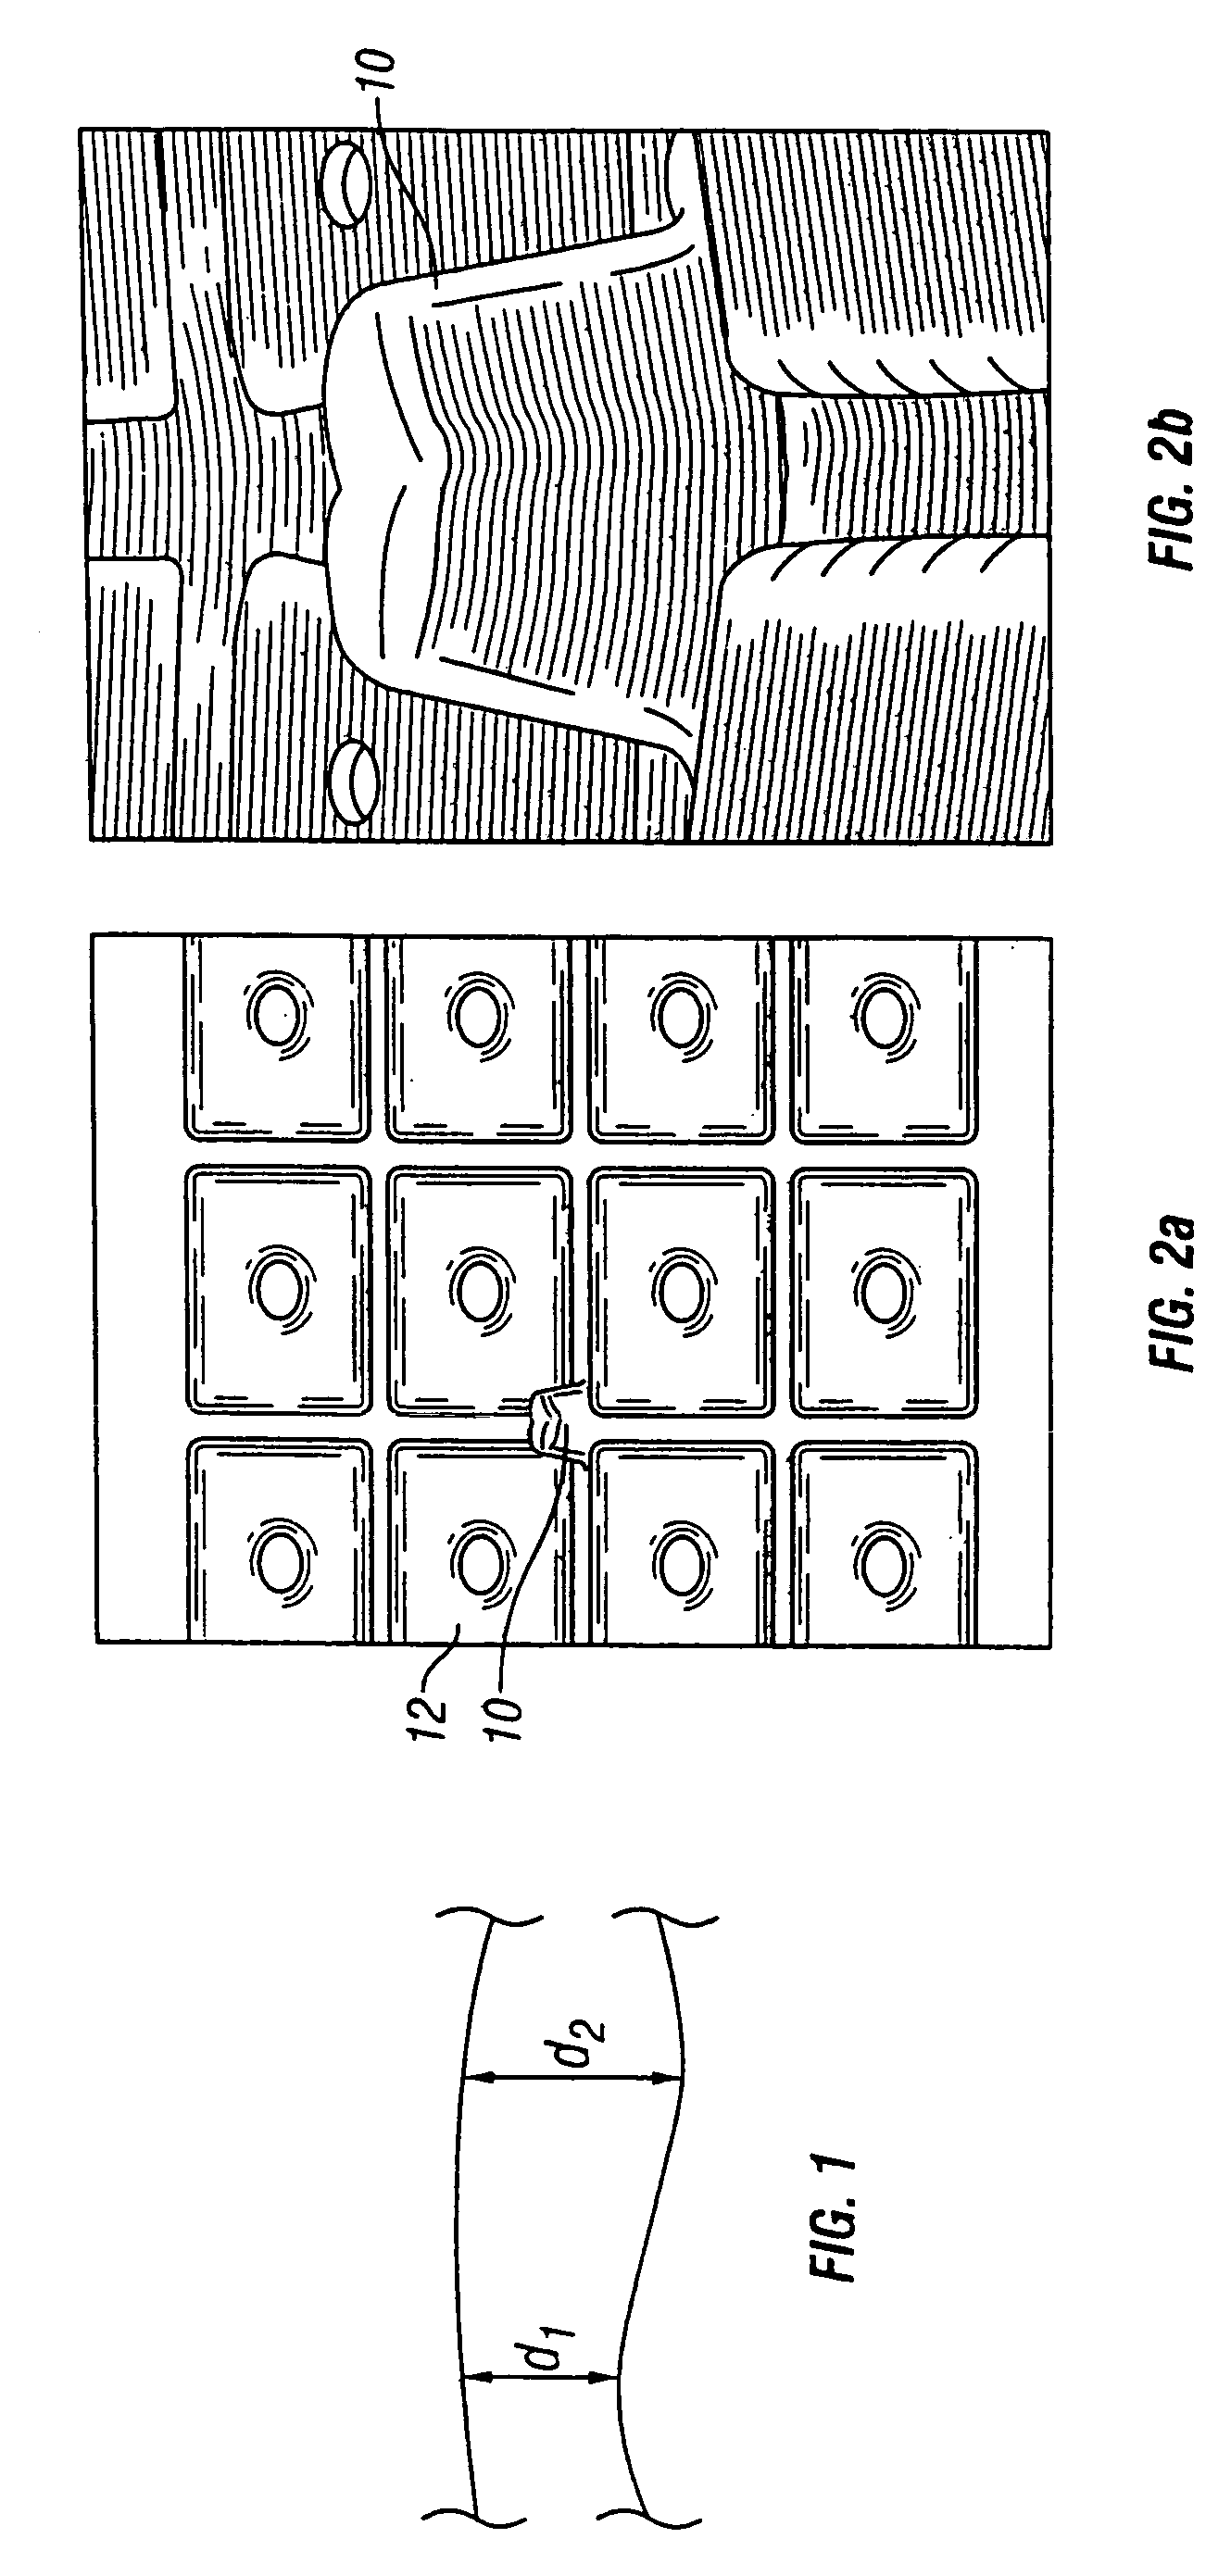 Method and apparatus for reducing the visual effects of nonuniformities in display systems